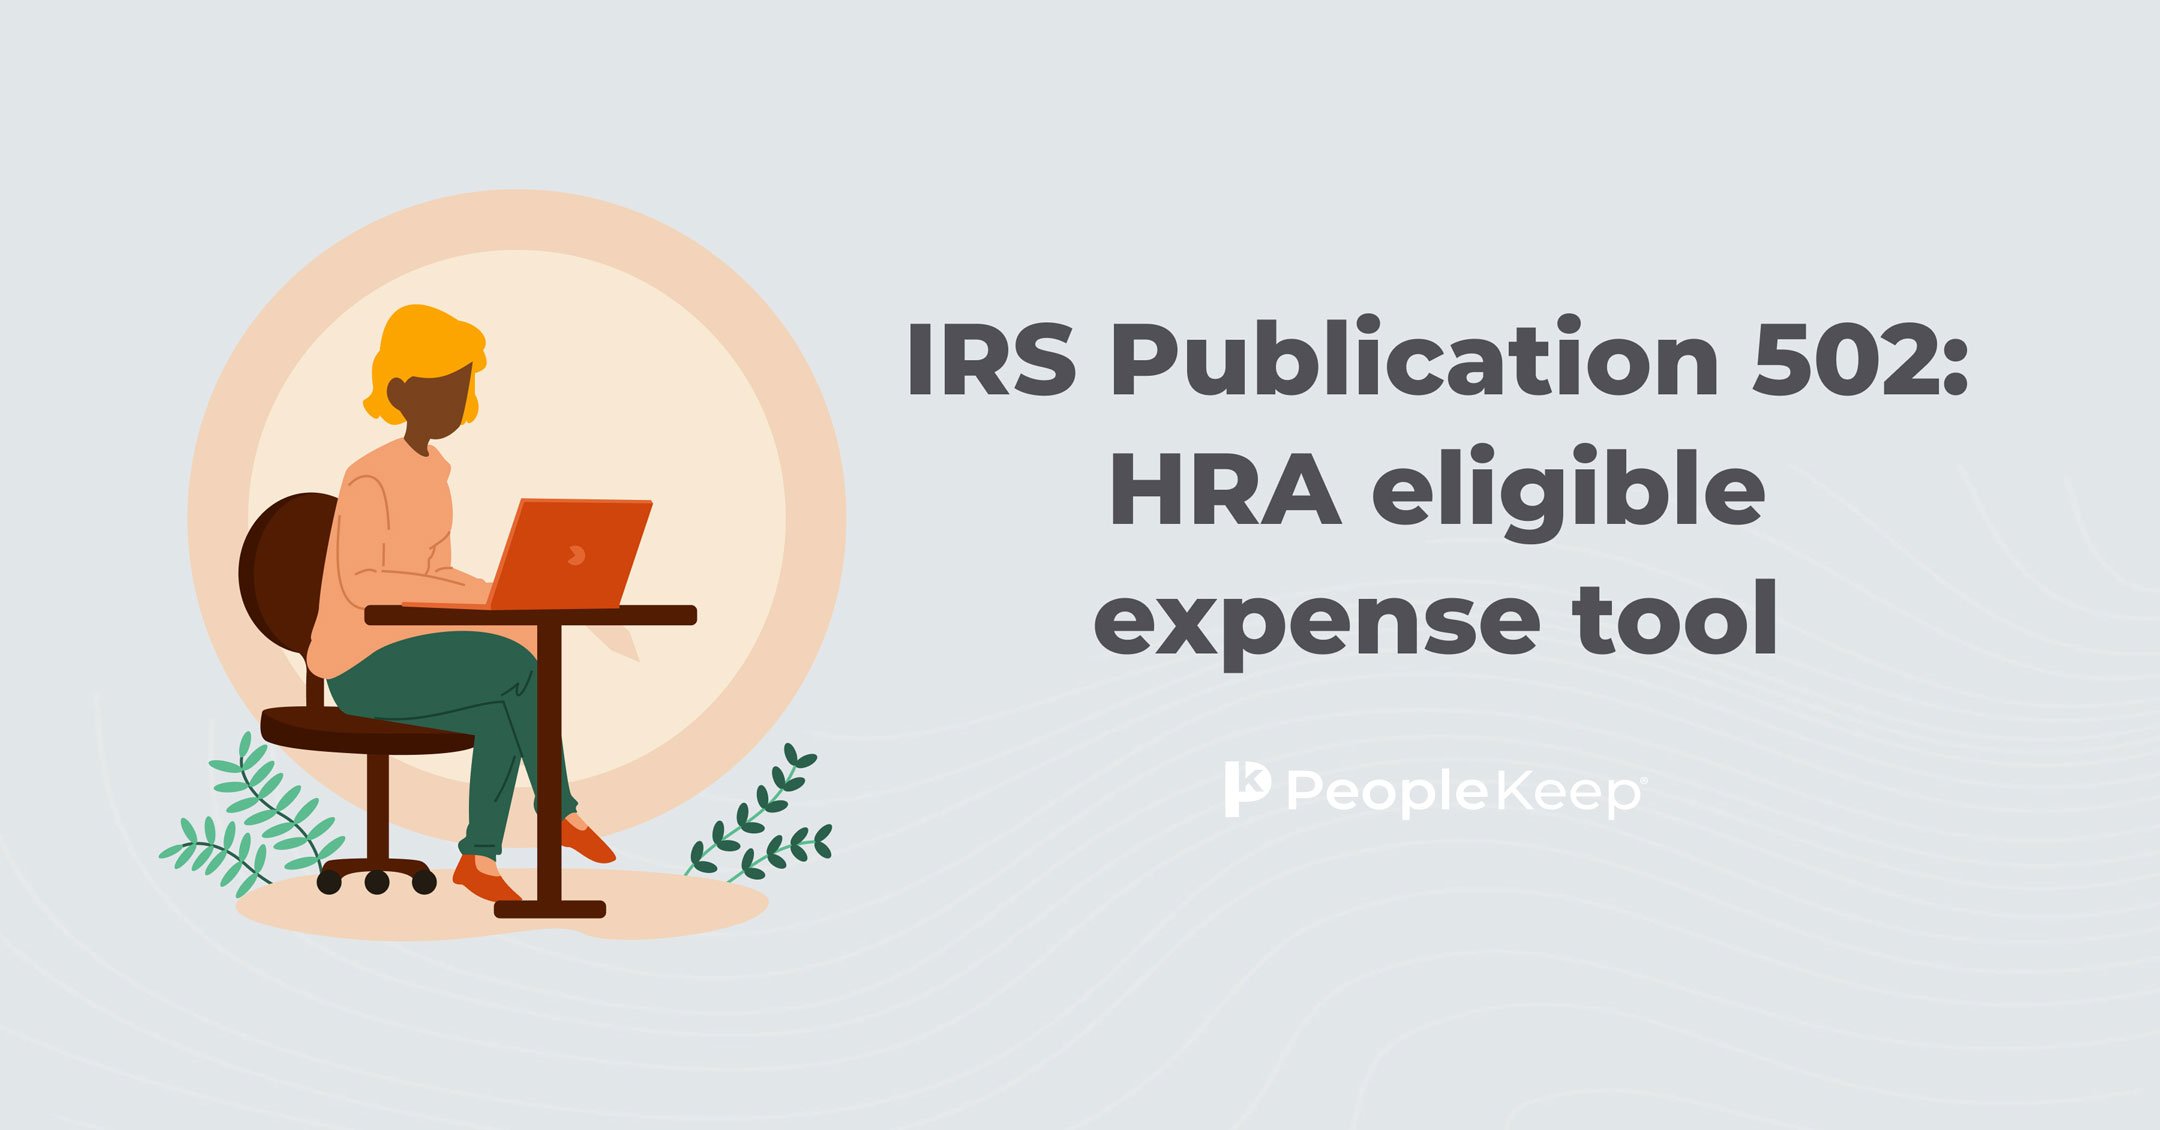 IRS 502 eligible expense tool for small business HRAs